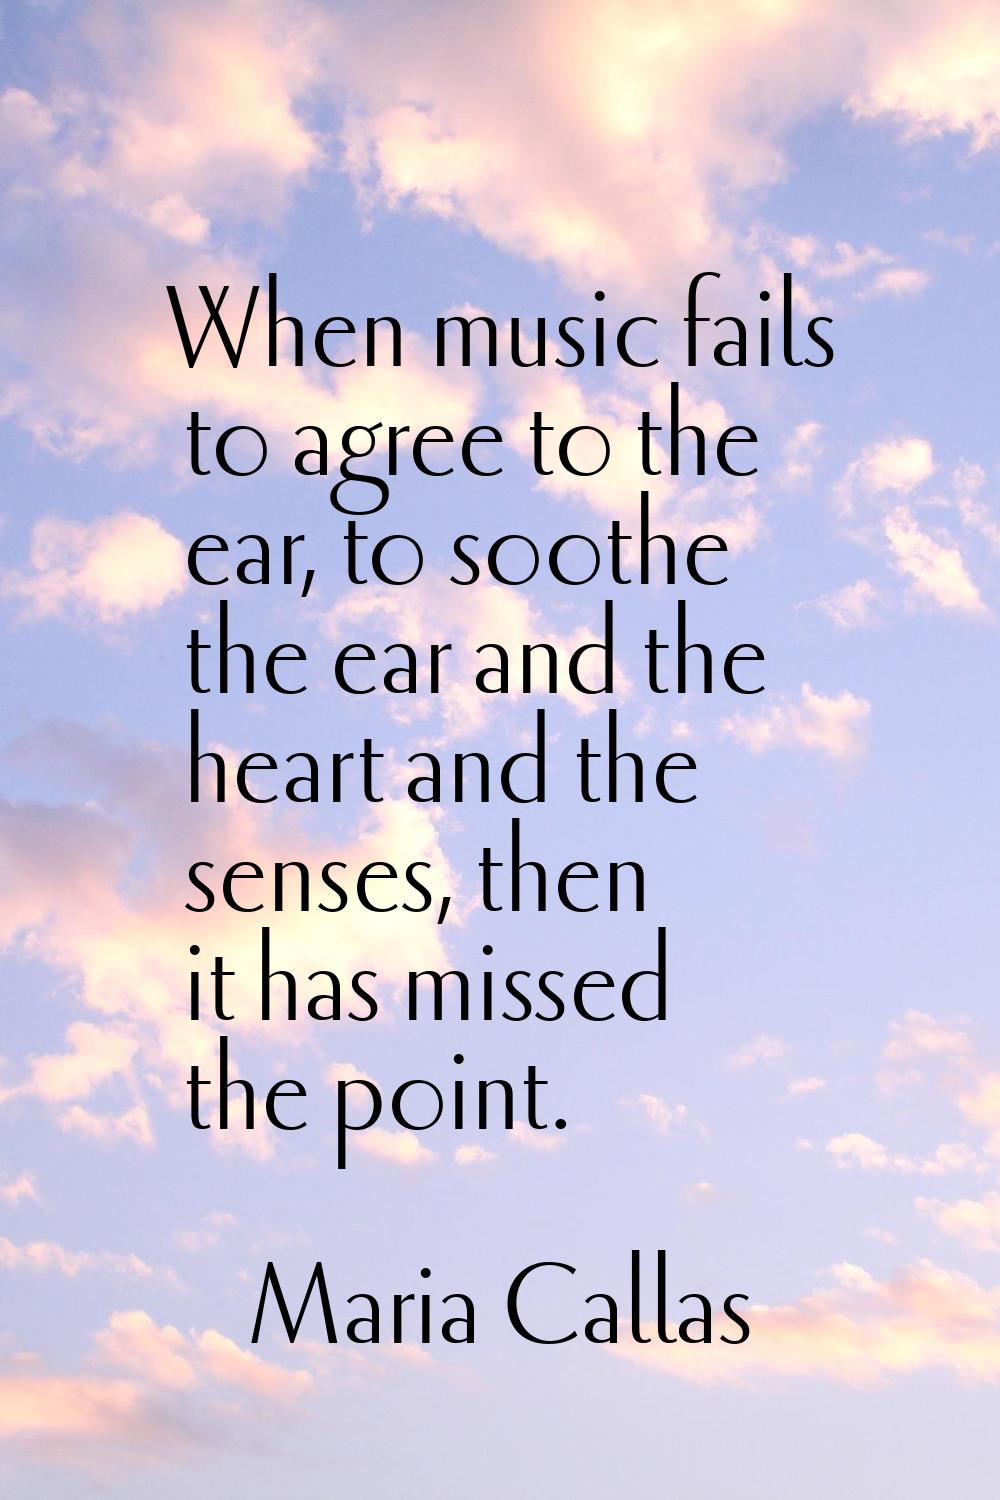 When music fails to agree to the ear, to soothe the ear and the heart and the senses, then it has m